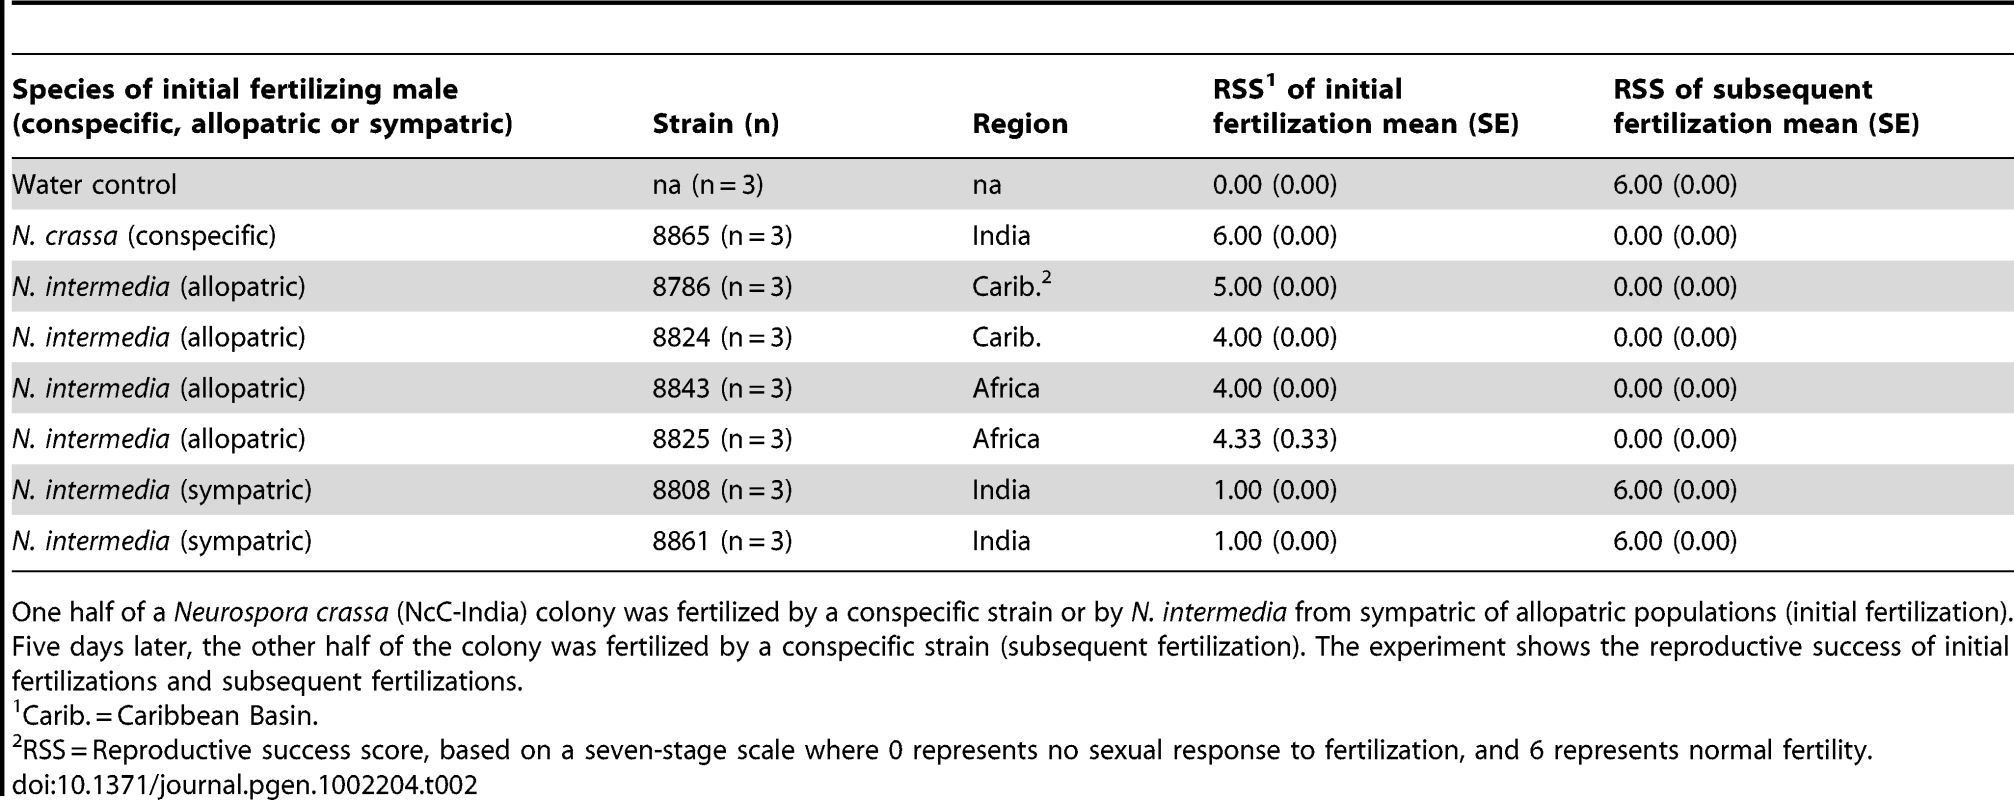 The effect of initial fertilization on subsequent maternal fertility in sequentially fertilized <i>Neurospora crassa</i> (NcC-India) colonies.